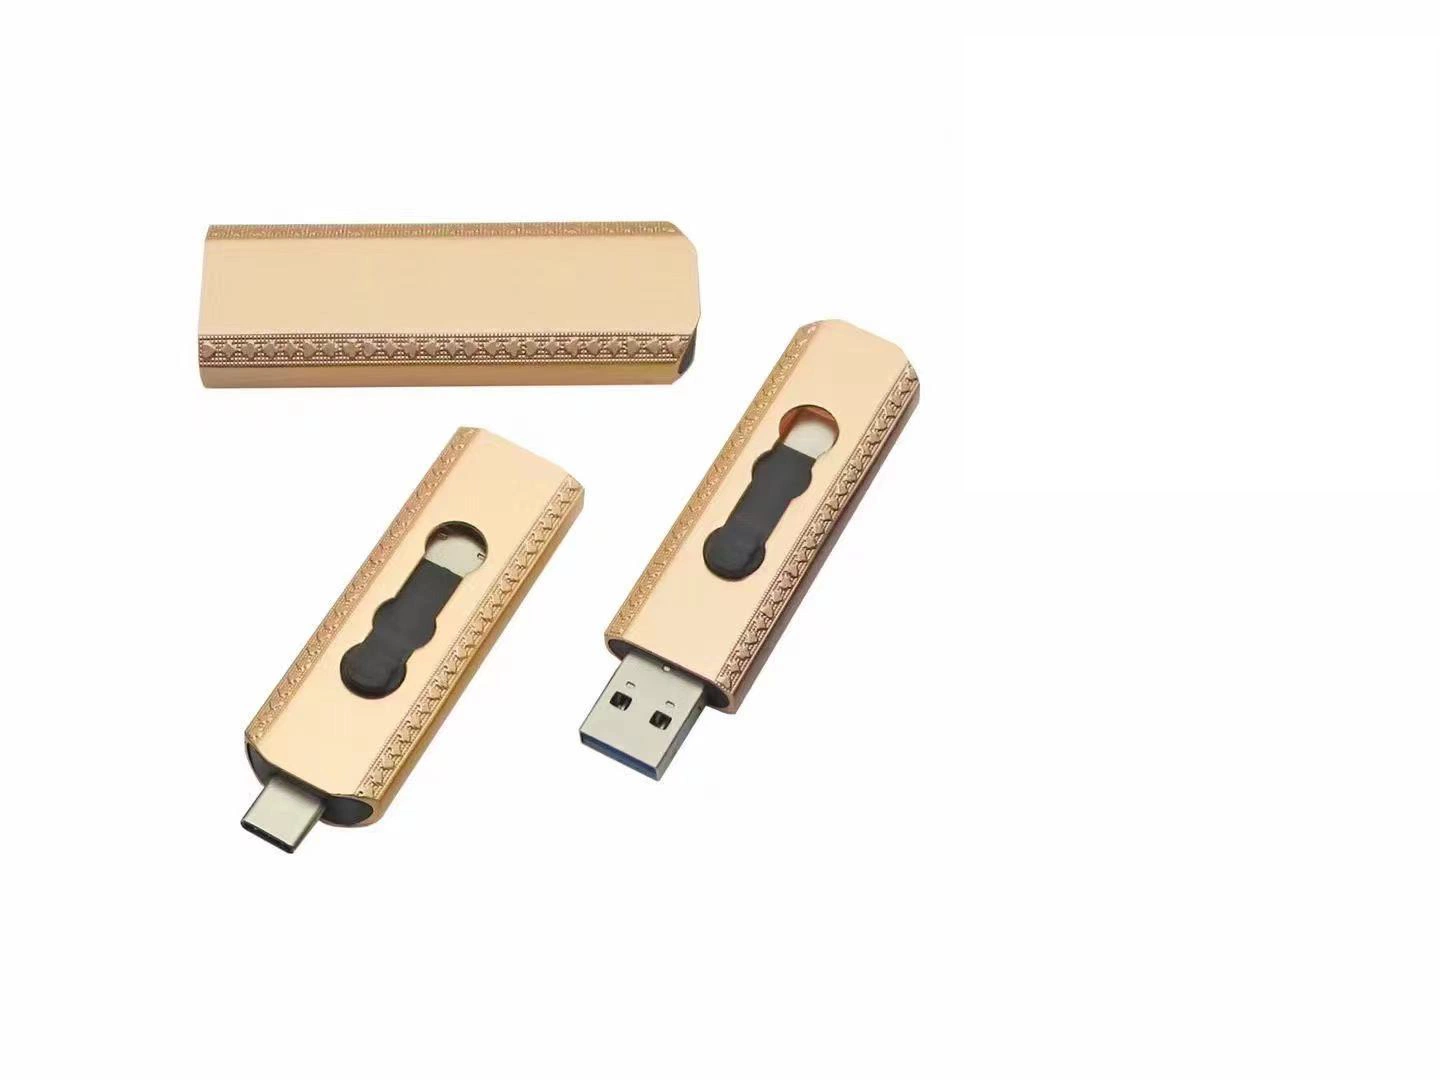 2021 New Metal OTG USB Flash Drive for Type C PC Computer Device